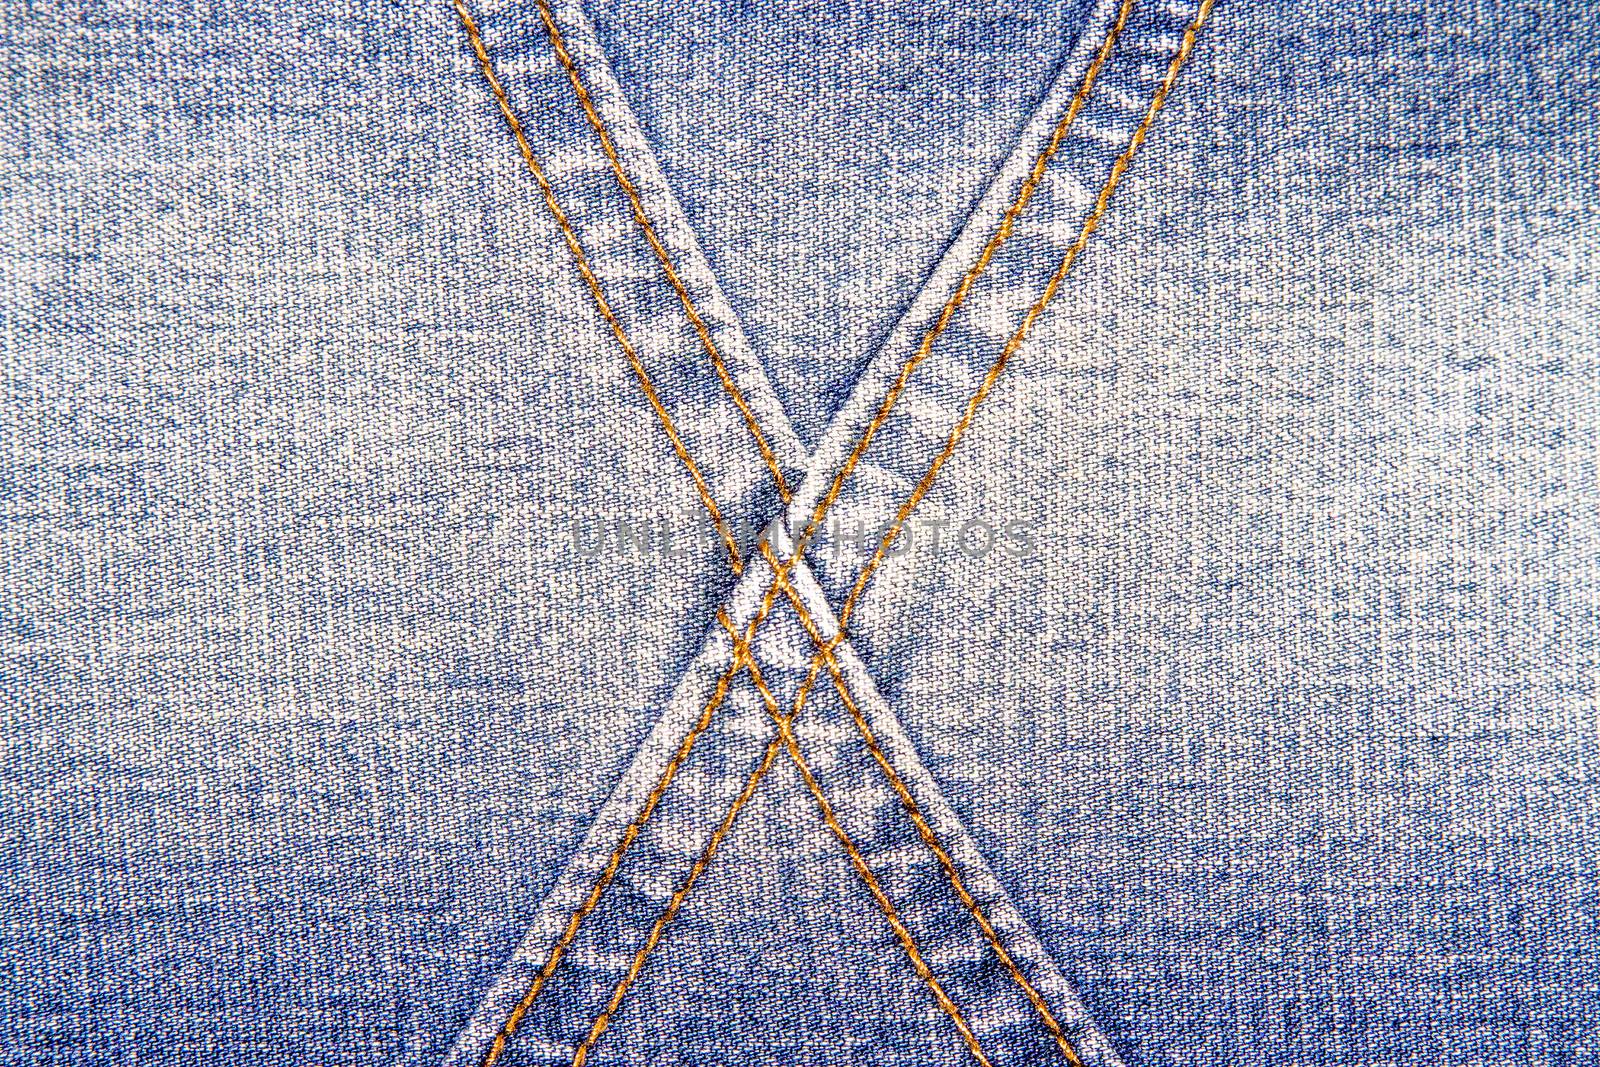 Blue jeans texture background and  cross orange seam 